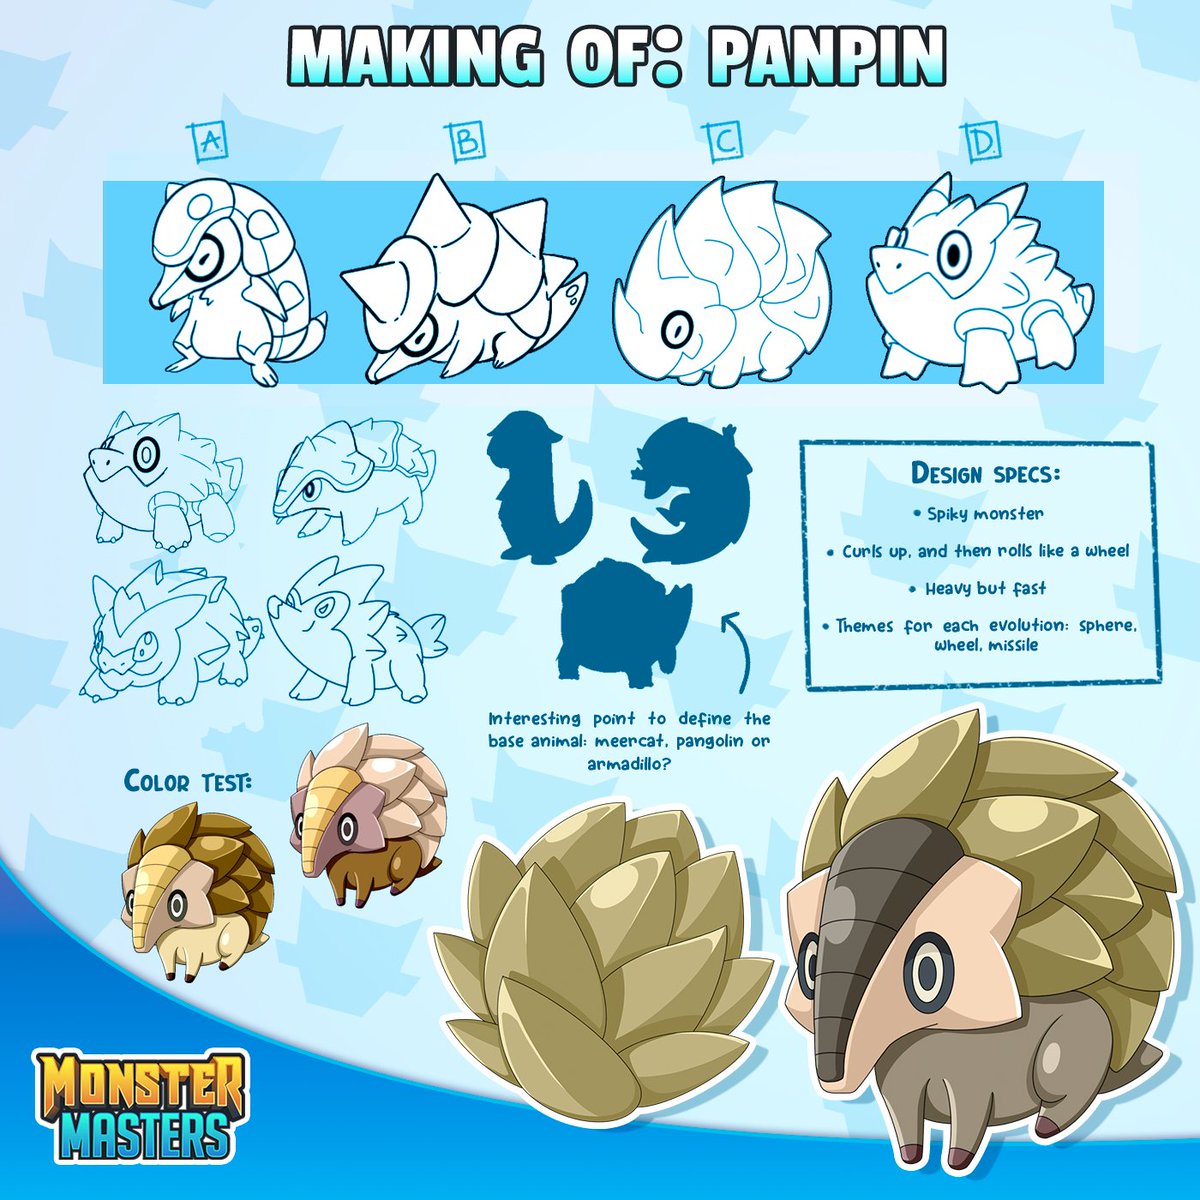 This is how PANPIN was born! 😍😭 Coming to Monster Masters 1st December!

#monstermasters #mobilegames #anime #fakemon #pokemon #gaming #games #gameplay #iosgames #androidgames #freetoplay #gamedesign #indiegames #twitch #mobilegaming #monsterbattles